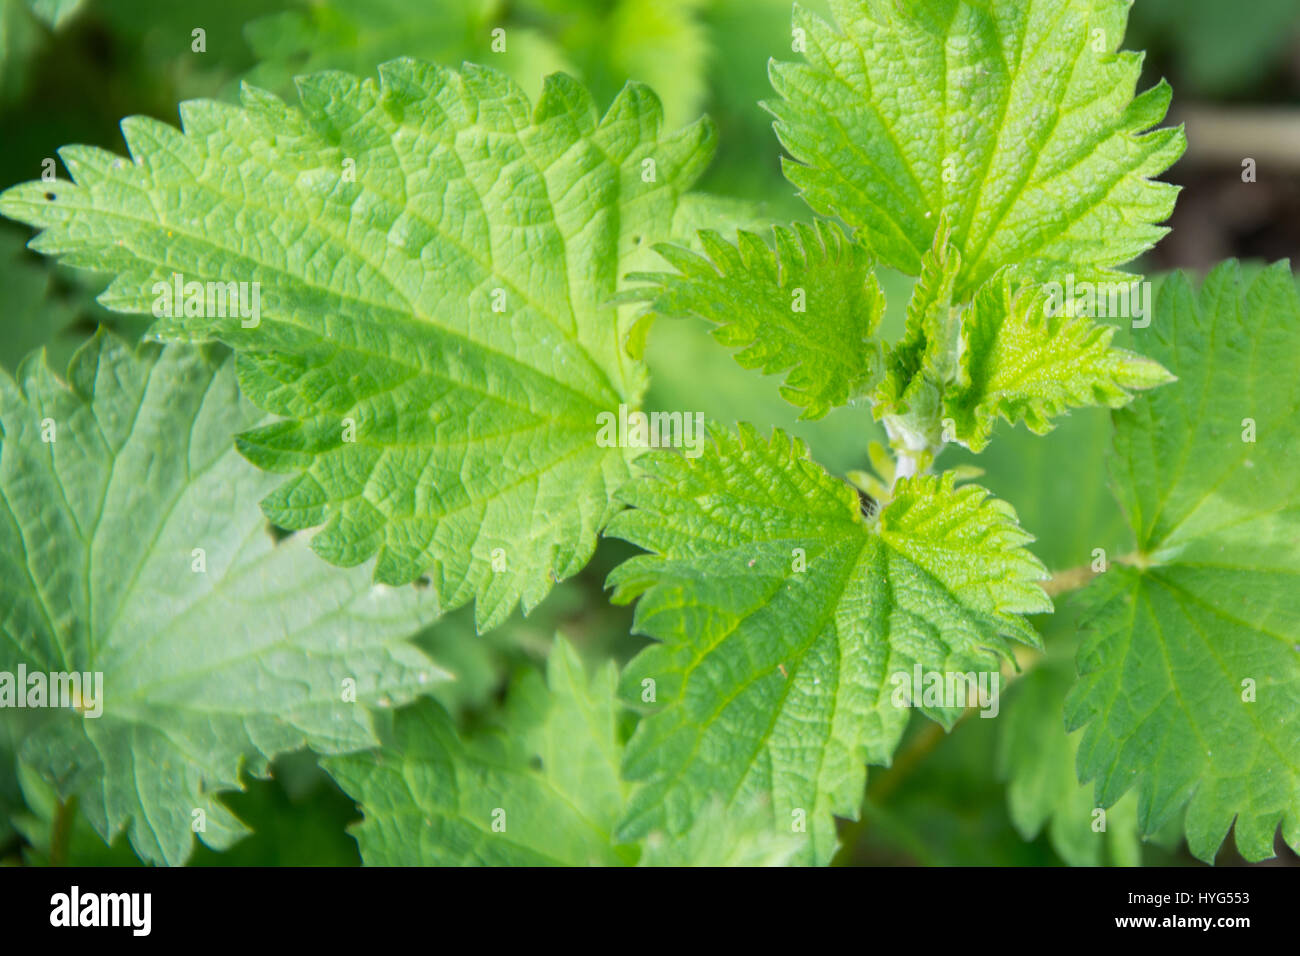 Nettles (urtica) natural medicinal green wild plant, healthy herbal Stock Photo